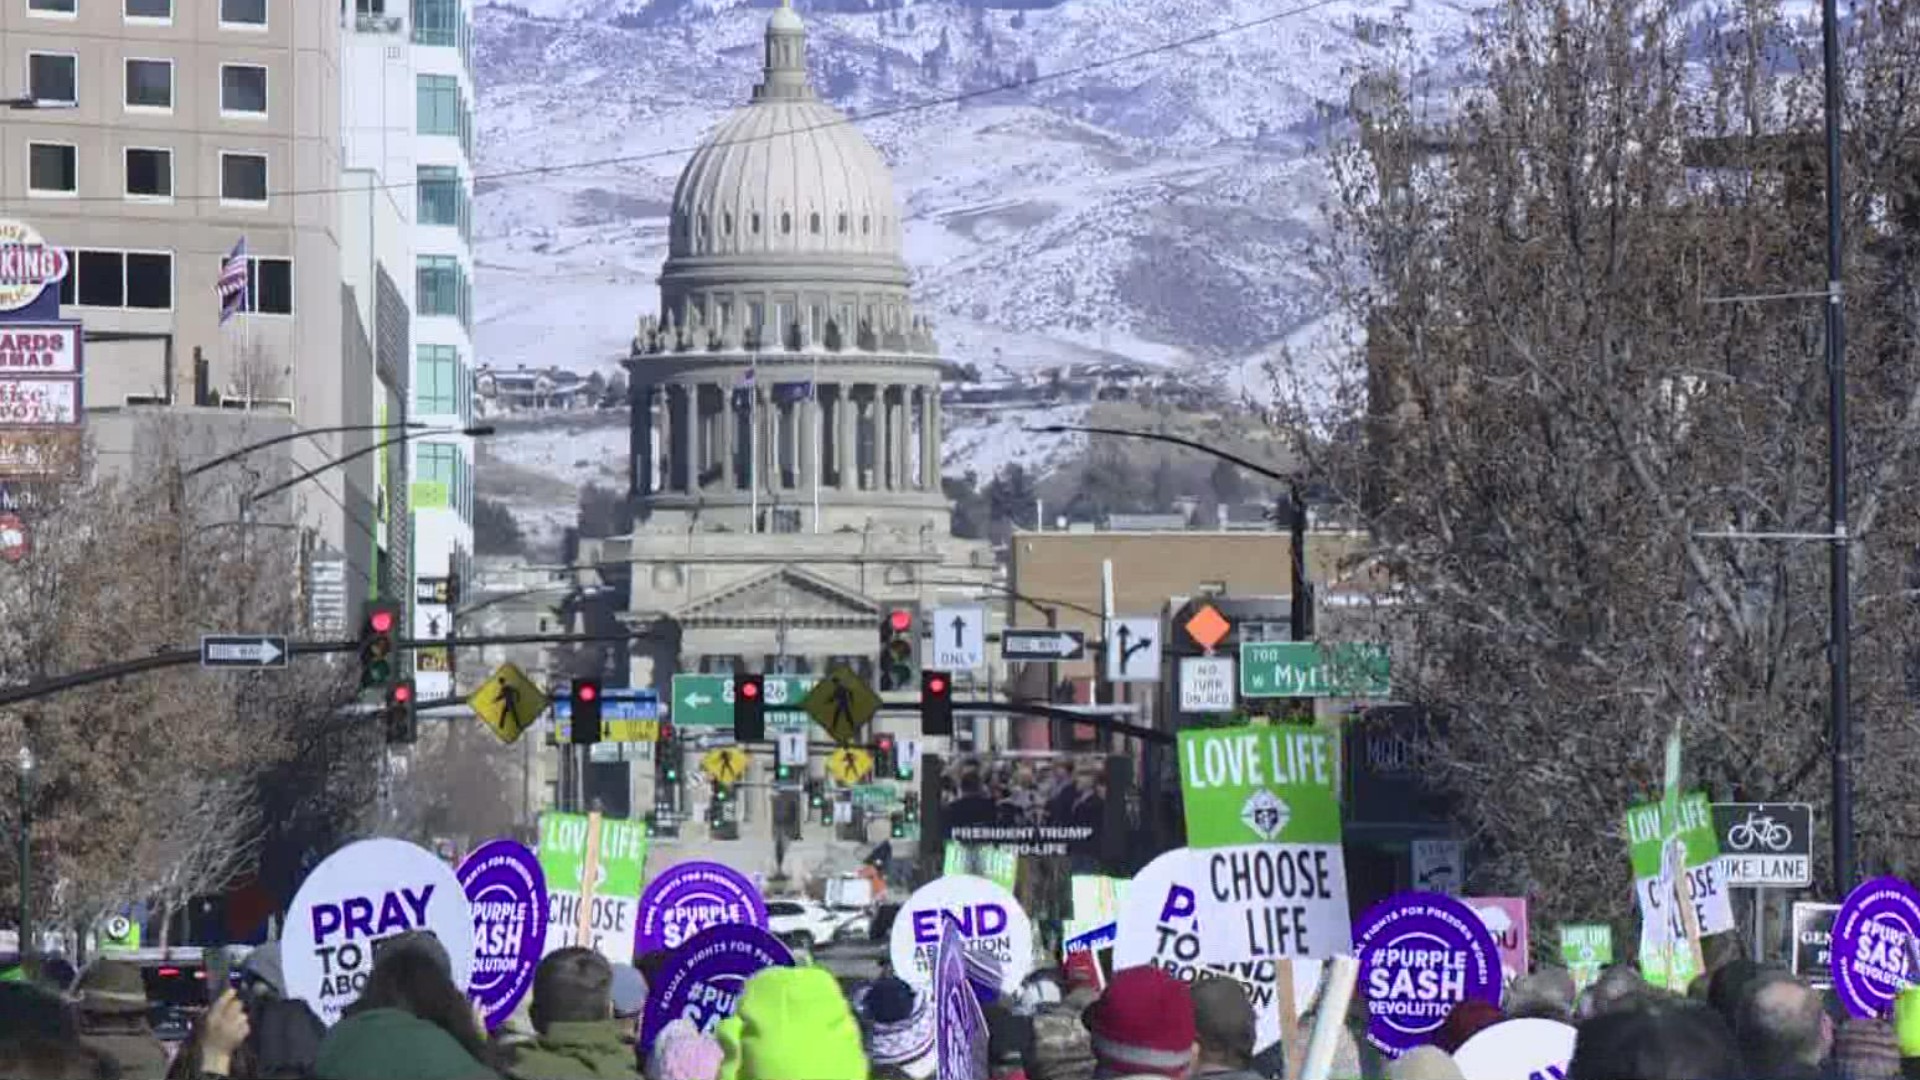 In past years, March For Life events in Idaho and across the country have marked the anniversary of the U.S. Supreme Court's Roe v. Wade decision on Jan. 22, 1973.